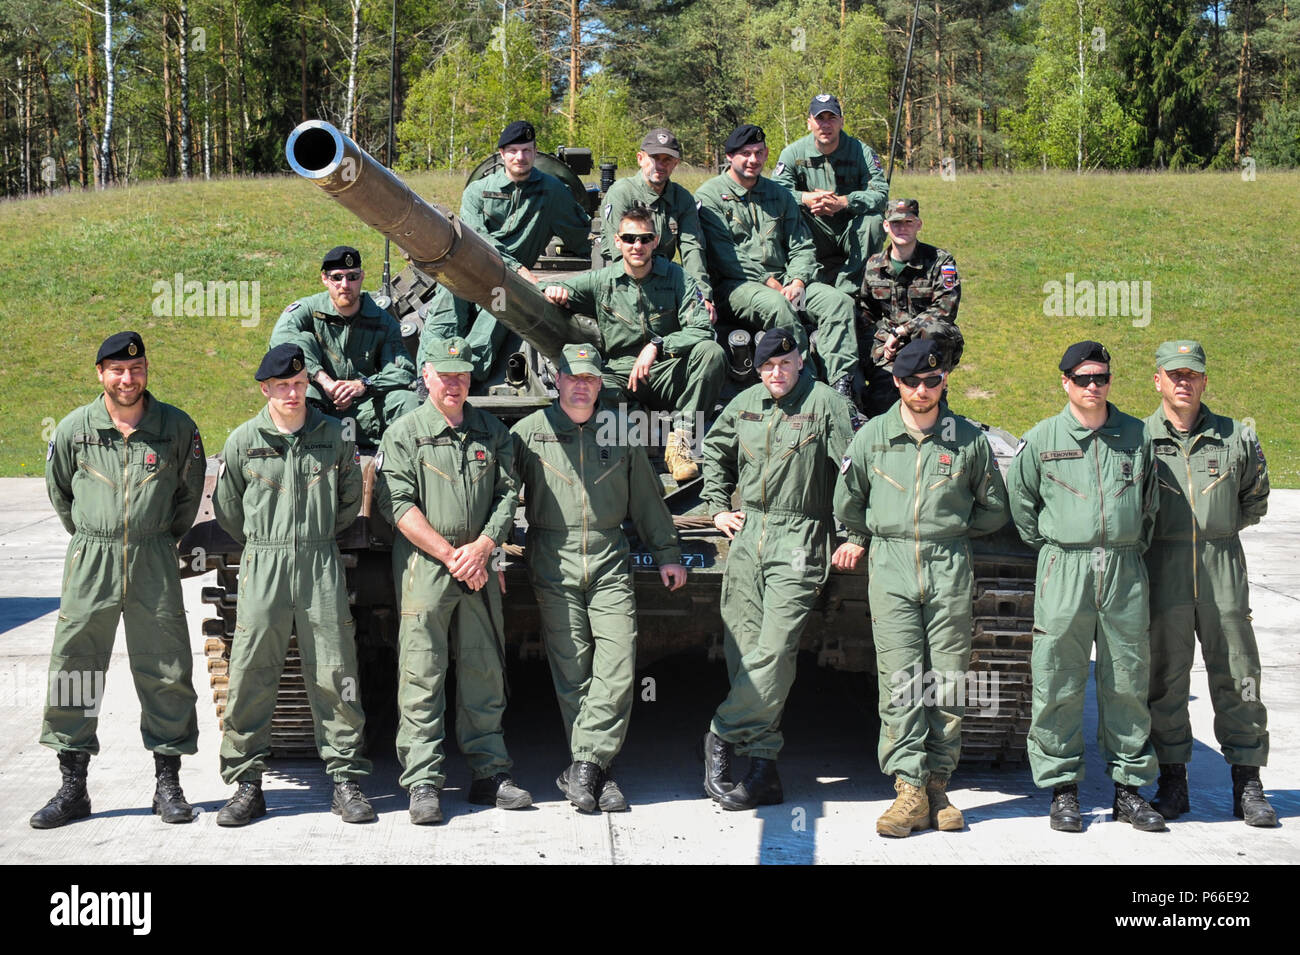 Soldiers from Slovenia participating in the Strong Europe Tank Challenge (SETC) pose for a group photo May 08, 2016 at Grafenwoehr Training Area, Germany. The SETC is co-hosted by U.S. Army Europe and the German Bundeswehr May 10-13, 2016. The competition is designed to foster military partnership while promoting NATO interoperability. Seven platoons from six NATO nations are competing in SETC - the first multinational tank challenge at Grafenwoehr in 25 years. For more photos, videos and stories from the Strong Europe Tank Challenge, go to http://www.eur.army.mil/tankchallenge/ (U.S. Army pho Stock Photo